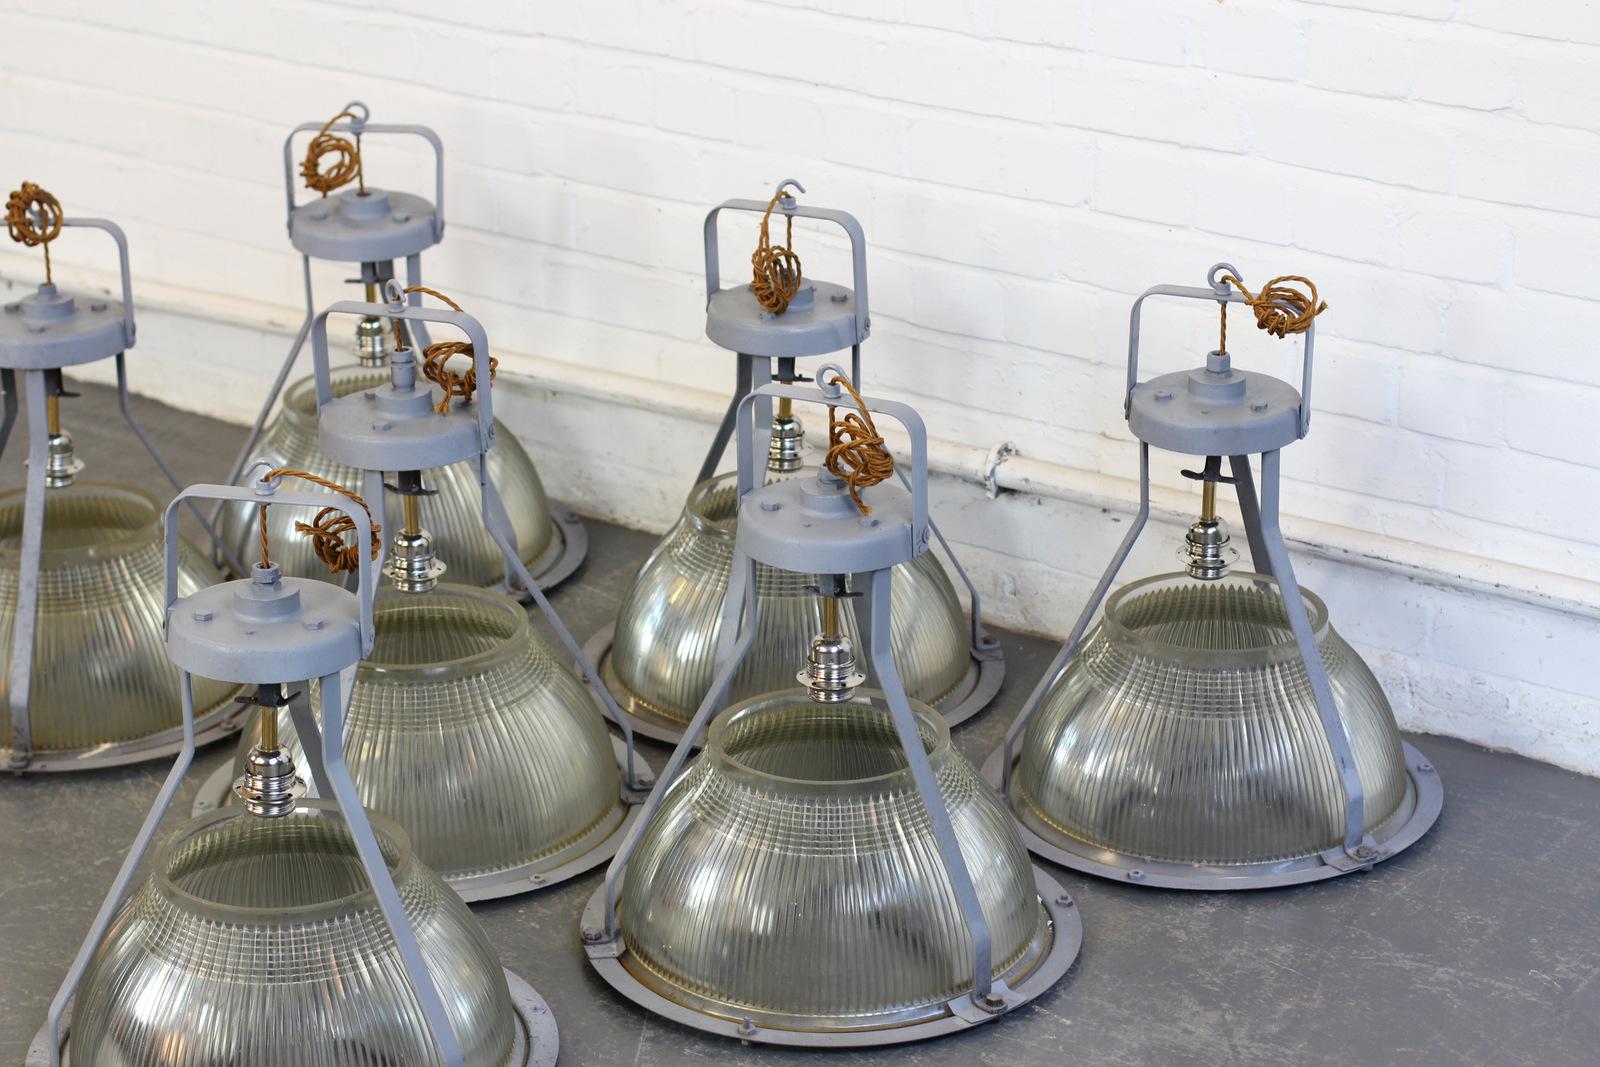 Large concord factory lights, circa 1950s.

- Price is per light (7 available)
- Heavy prismatic Holophane glass
- Cast steel tops
- Takes E27 fitting bulbs
- Comes with steel suspension chain and ceiling hooks
- Salvaged from the Concord